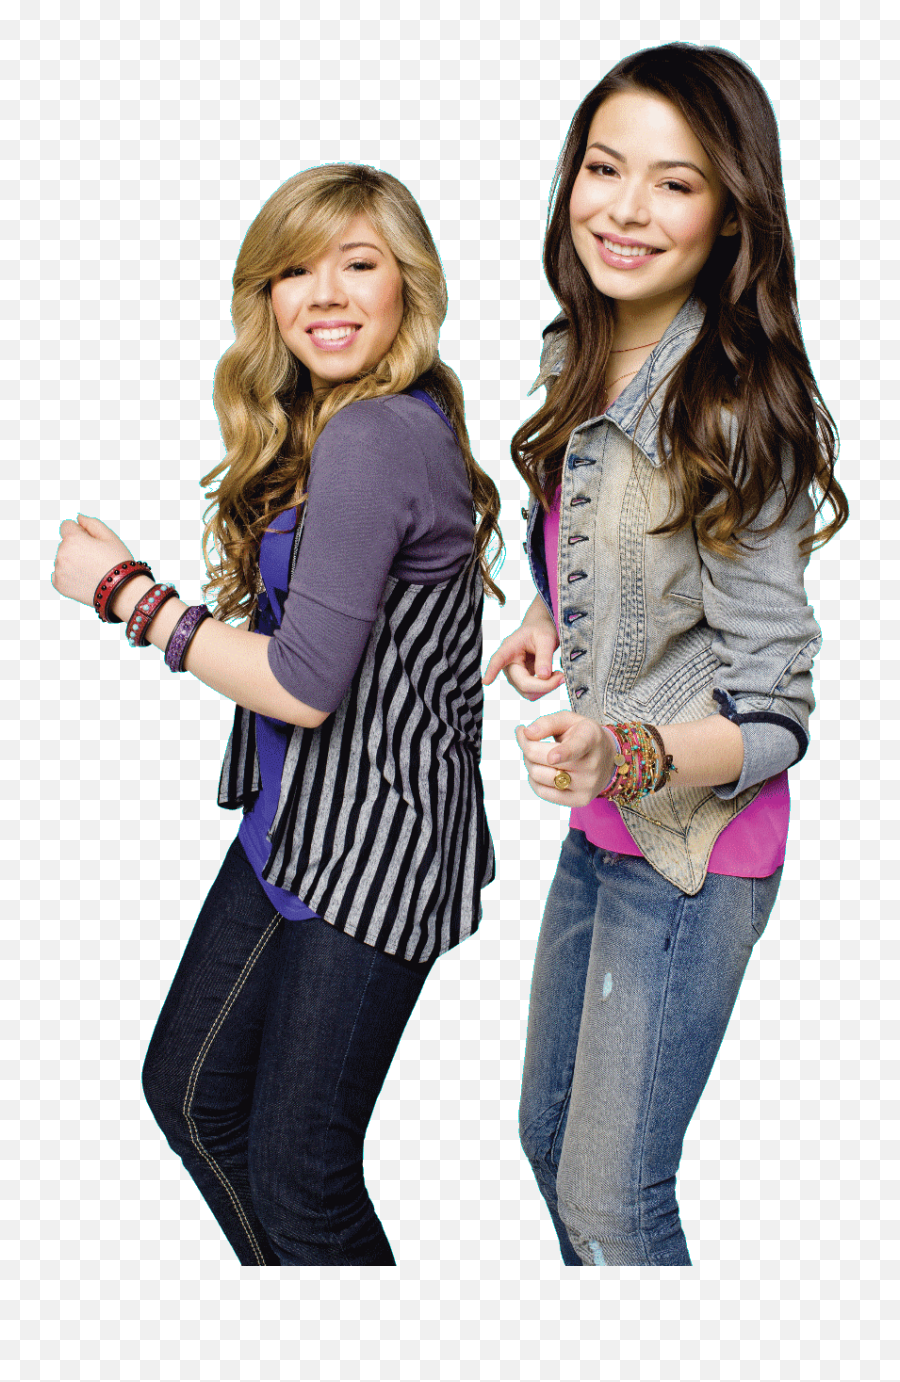 Download Ameu003dhttps - Www Youtube Guy Nickelodeon Icarly Carly Vs Sam Png,Icarly Logo